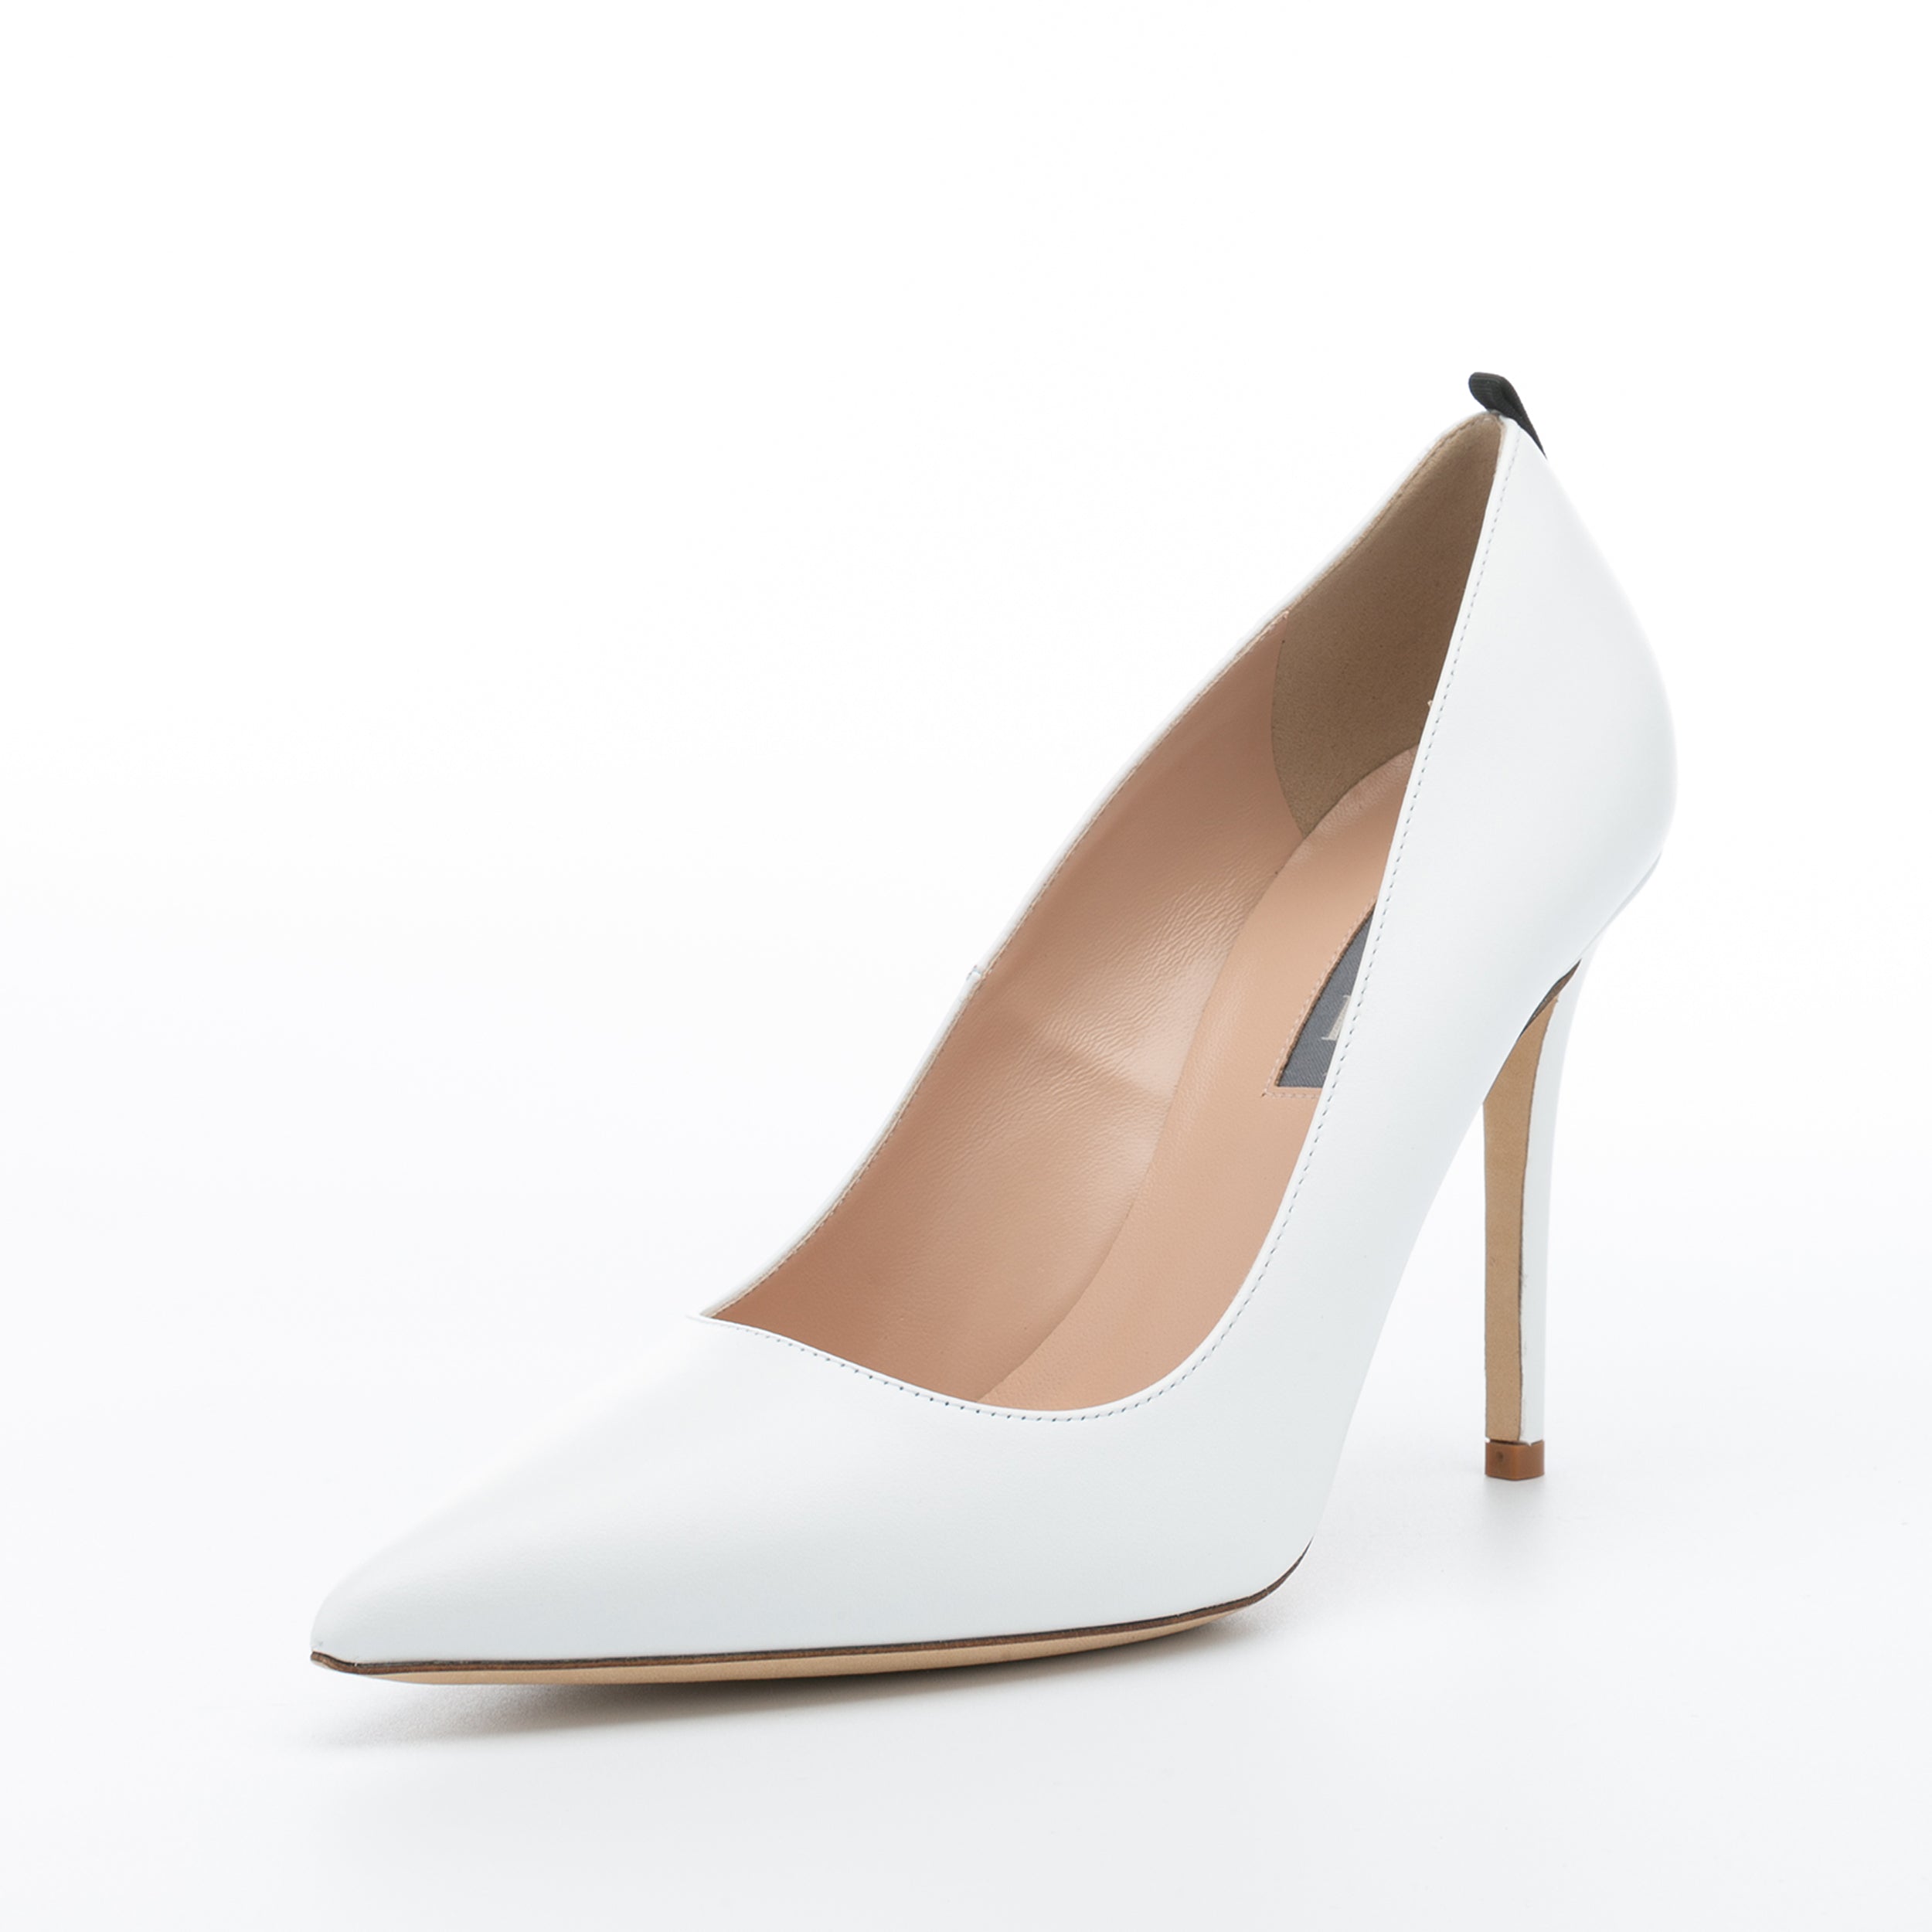 SJP by Sarah Jessica Parker Fawn 100mm White Leather Pumps